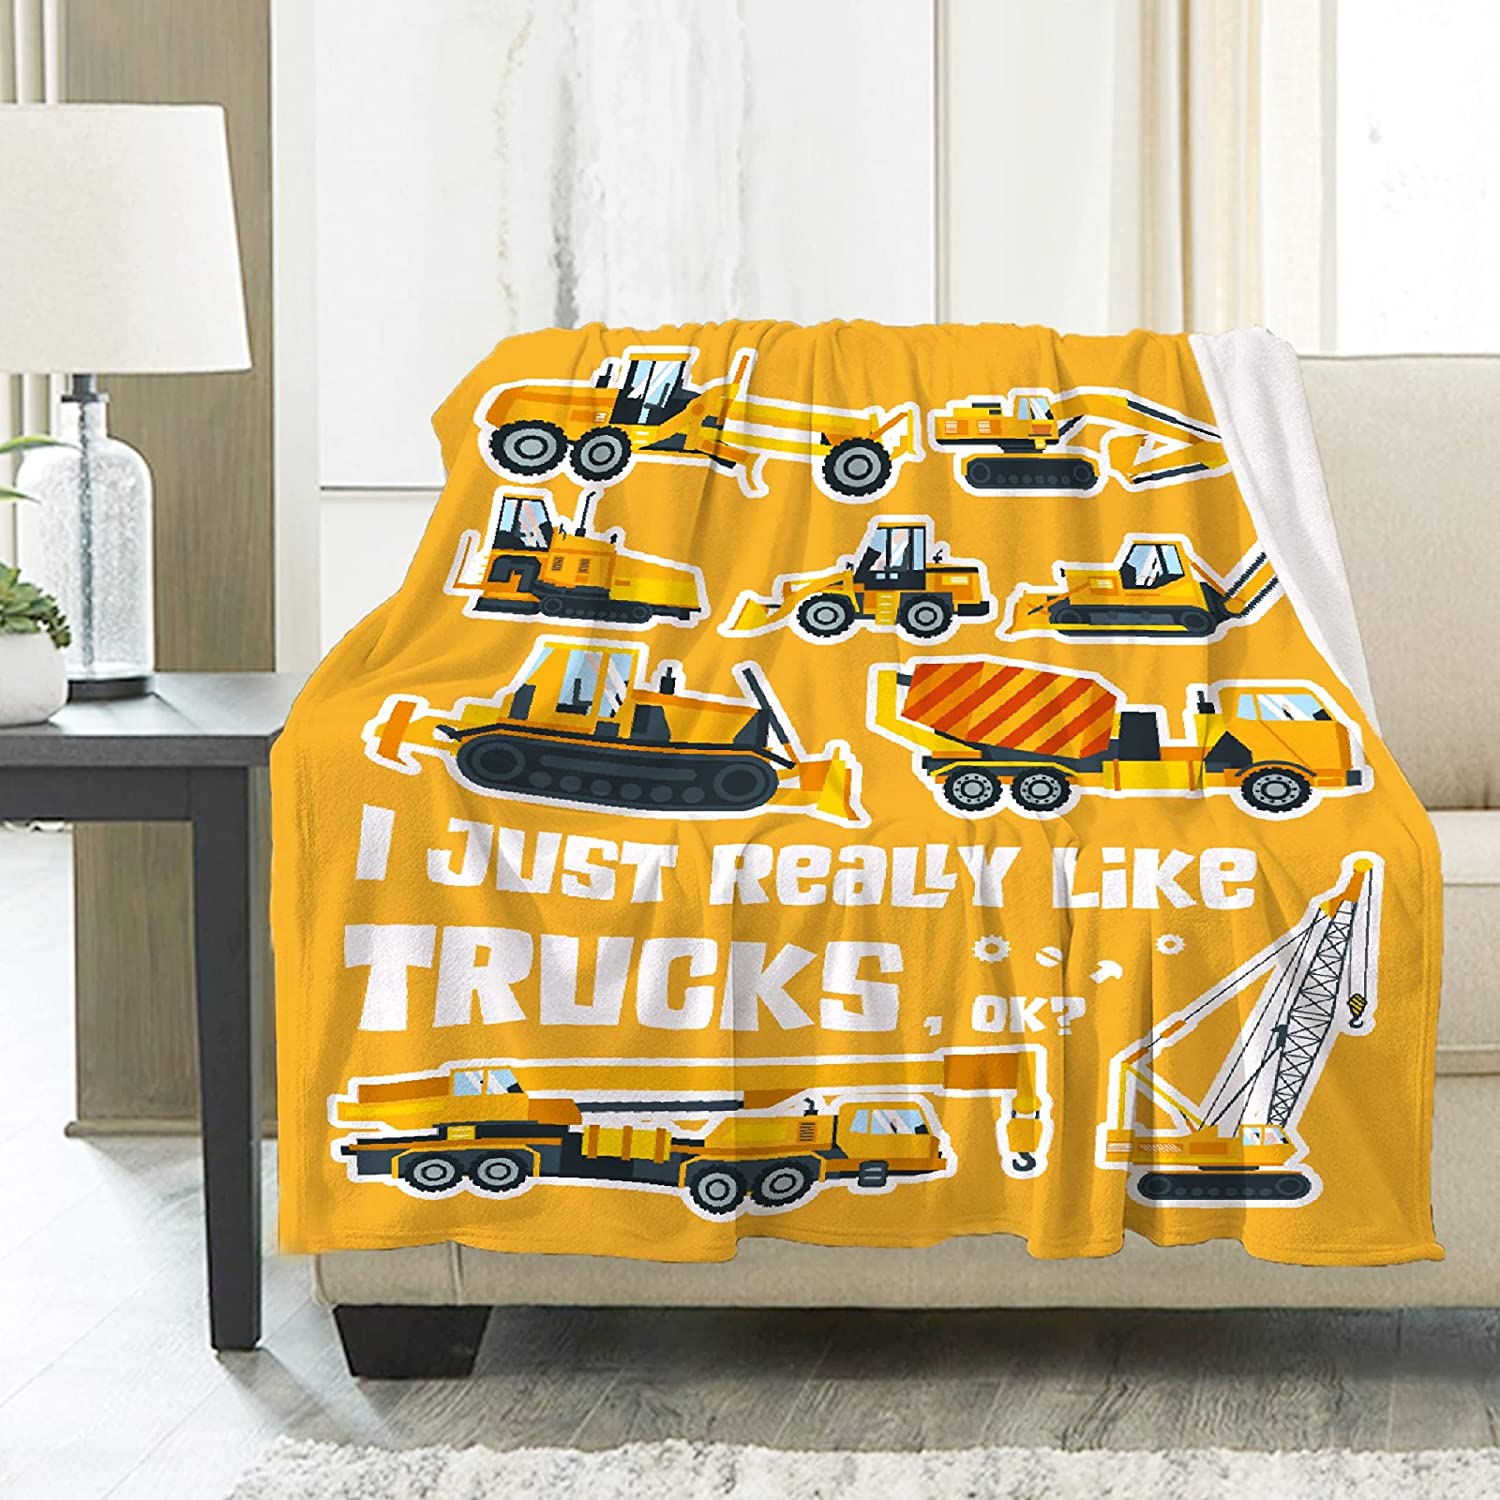 Trucks Blanket, I Just Really Like Trucks, Ok? Throw Blanket for Girls Boys Gifts, Ultral Soft Cozy Warm Flannel Fleece Suit for Sofa, Couch, Bed, Travel, Sofa 80"x60" L Blanket for Adults - image 1 of 6